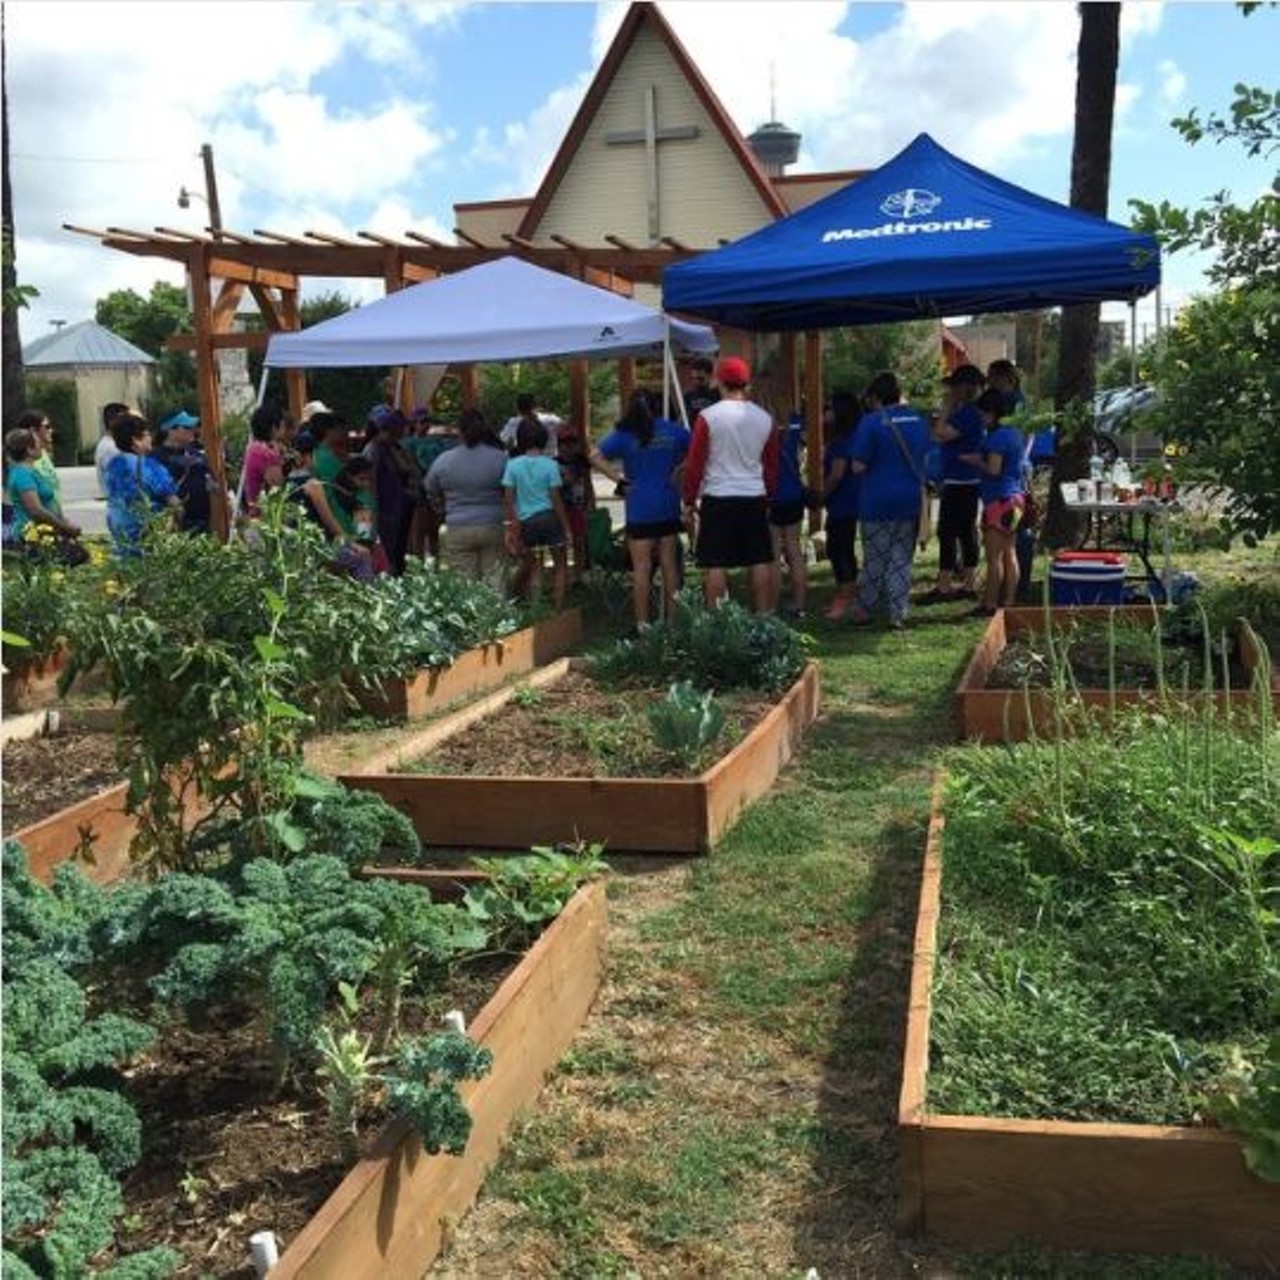 Participate in a community garden 
Make a weekly hangout out of caring for your veggies and plants at a community garden with your friends. You&#146;ll love gardening. It&#146;s a relaxing and worthwhile way to spend your time. It&#146;s also a great way to have fresh vegetables and ingredients.  
Photo via Instagram, monica.lto